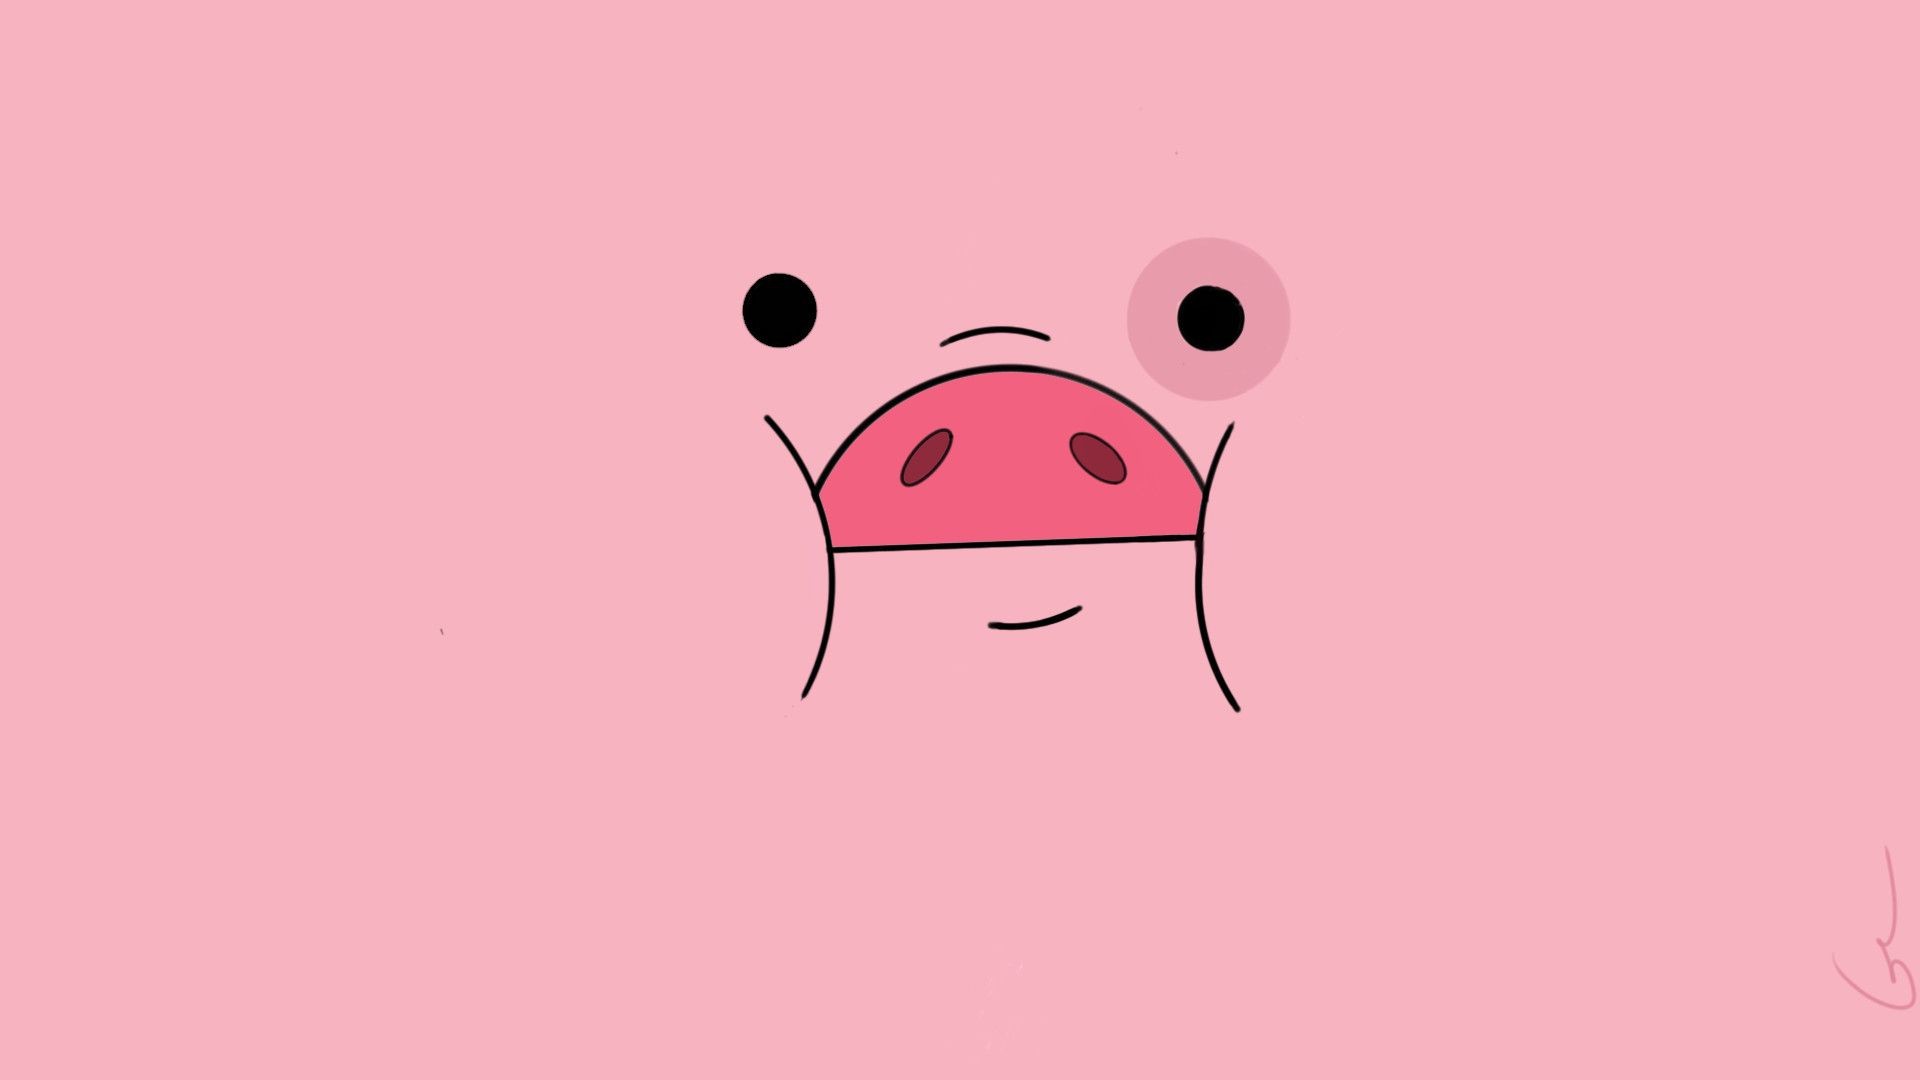 1920x1080 1338x858 Stunning Pig Wallpaper Of Cute Piglet Backgrounds Inspiration And">